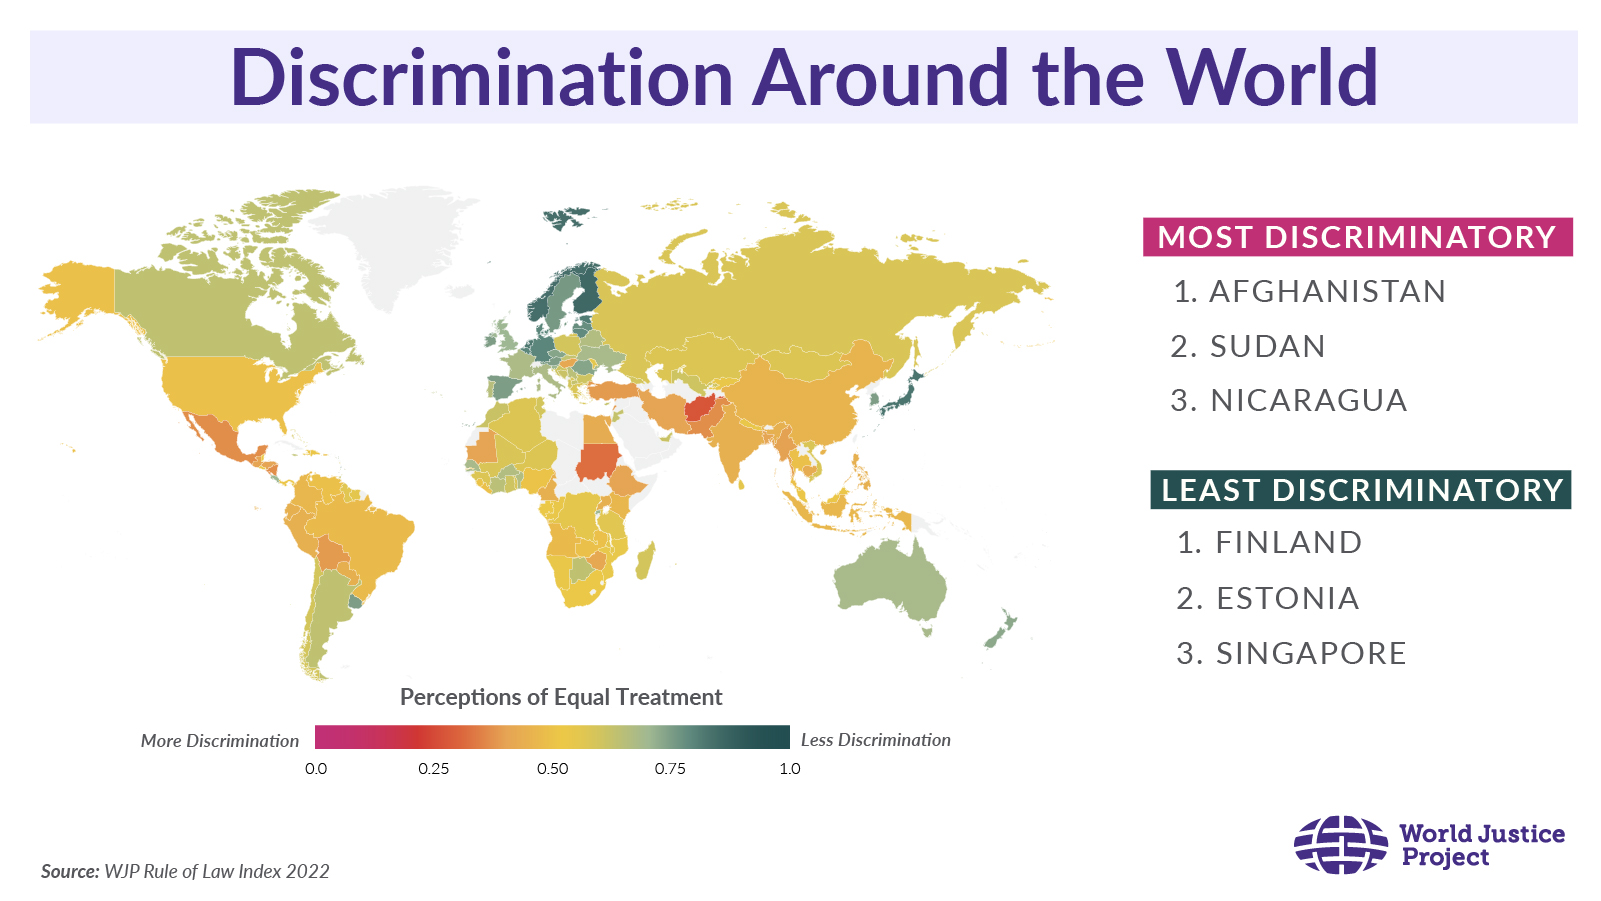 A heat map of the world showing where discrimination is prevalent, along with the top 3 and bottom 3 countries pictured